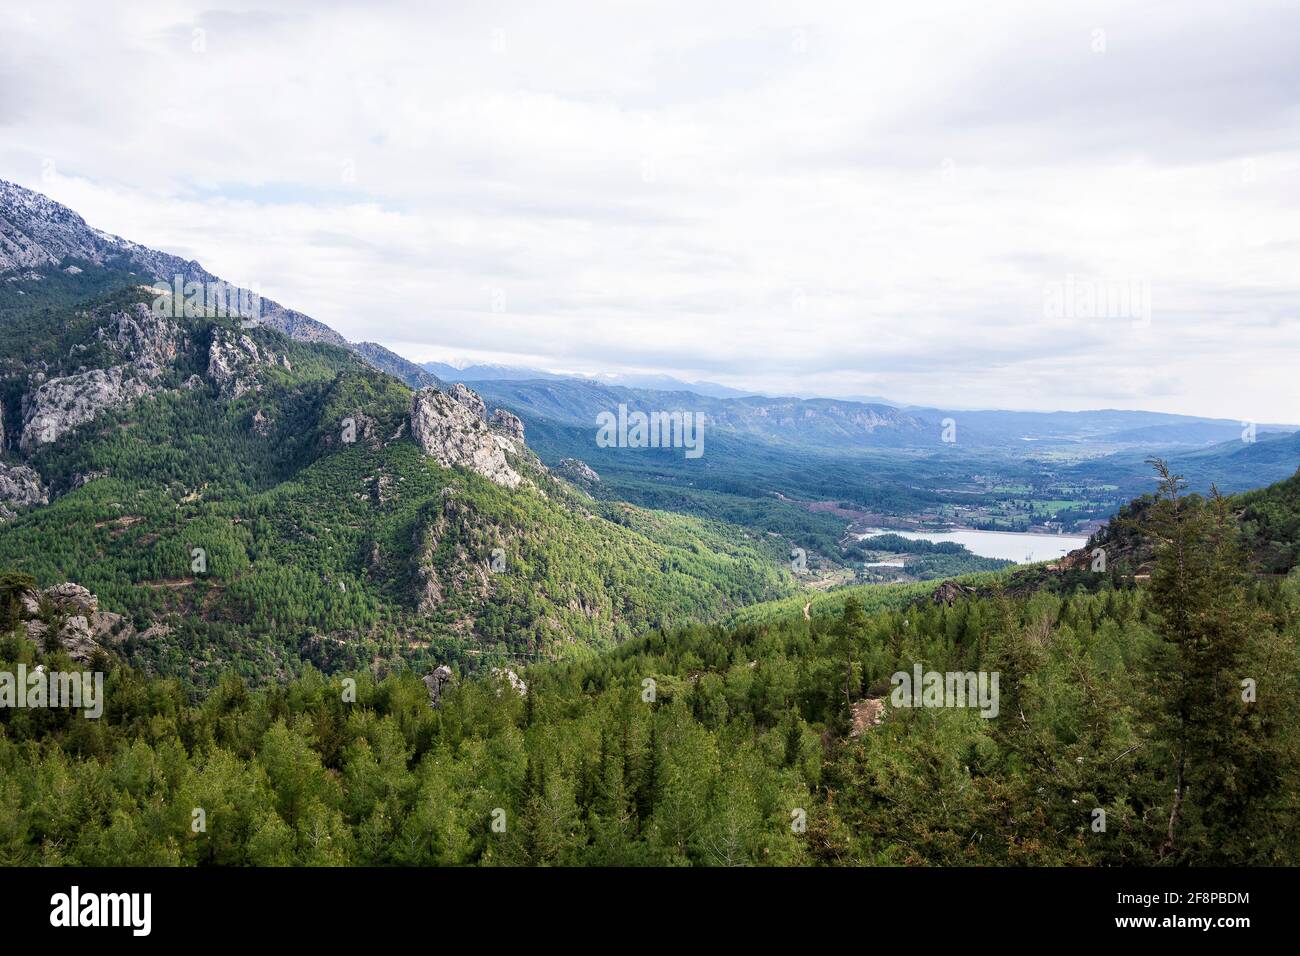 View over the Taurus mountains in Turkey Stock Photo